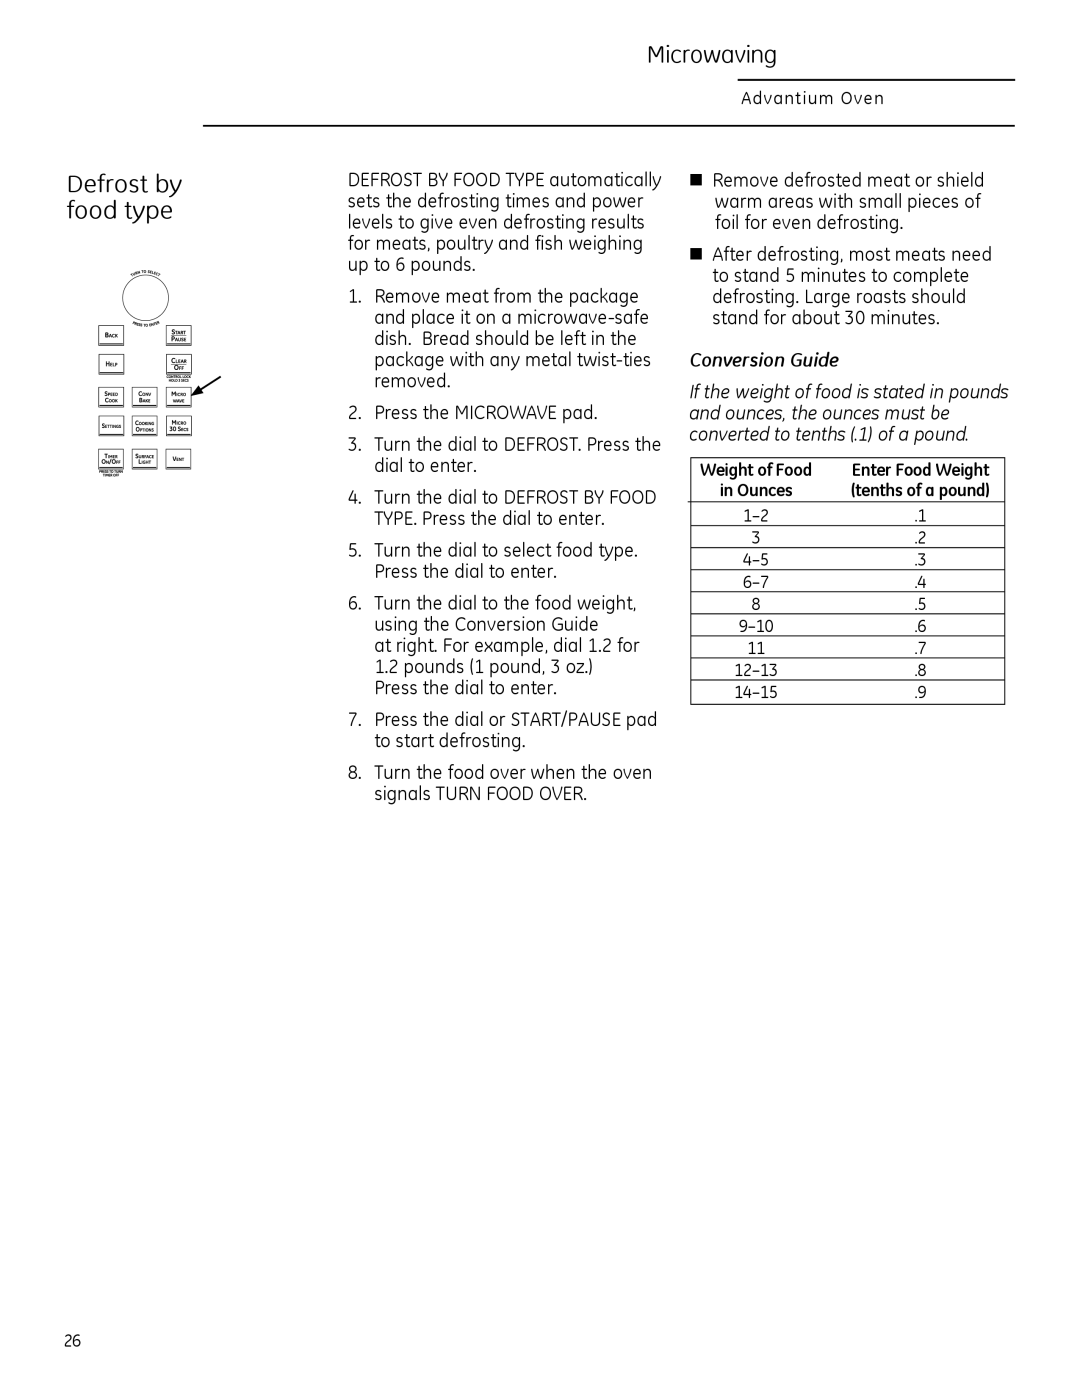 GE CSA1201, PSA1200, PSA1201 owner manual Defrost by food type, Microwaving, Conversion Guide 